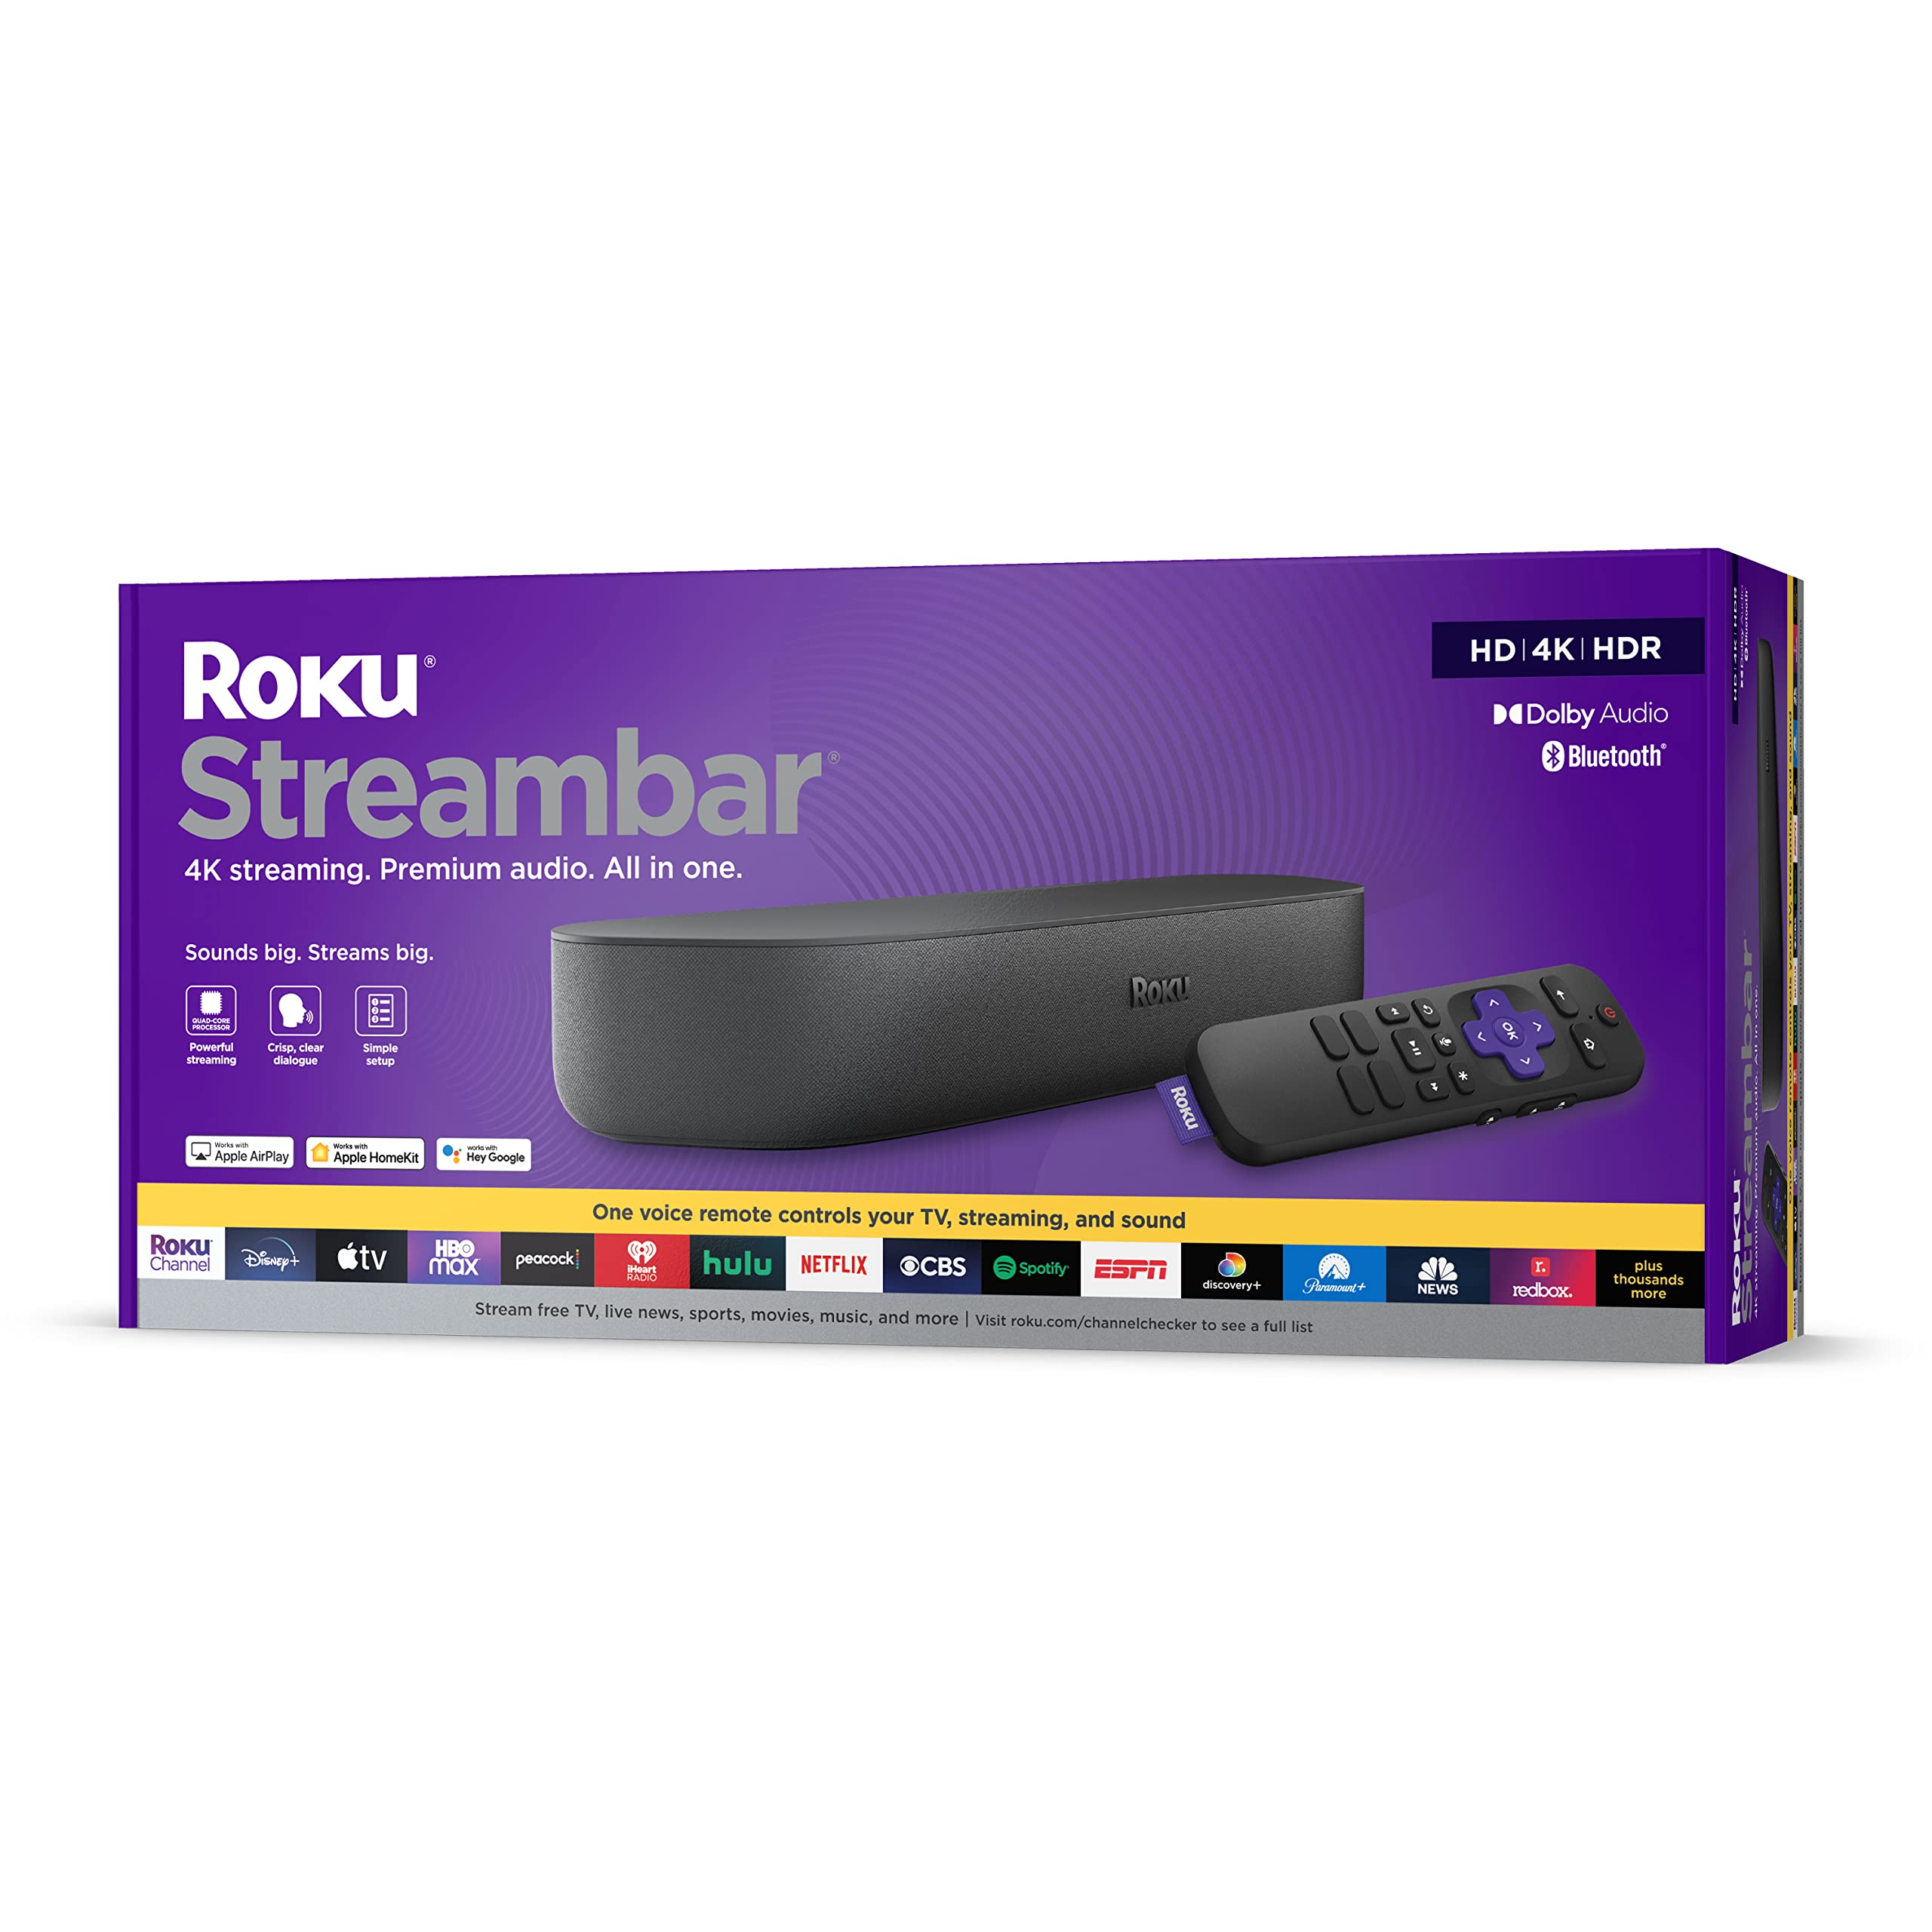 Roku Streambar | 4K/HD/HDR Streaming Media Player & Premium Audio, All in One, Includes Voice Remote